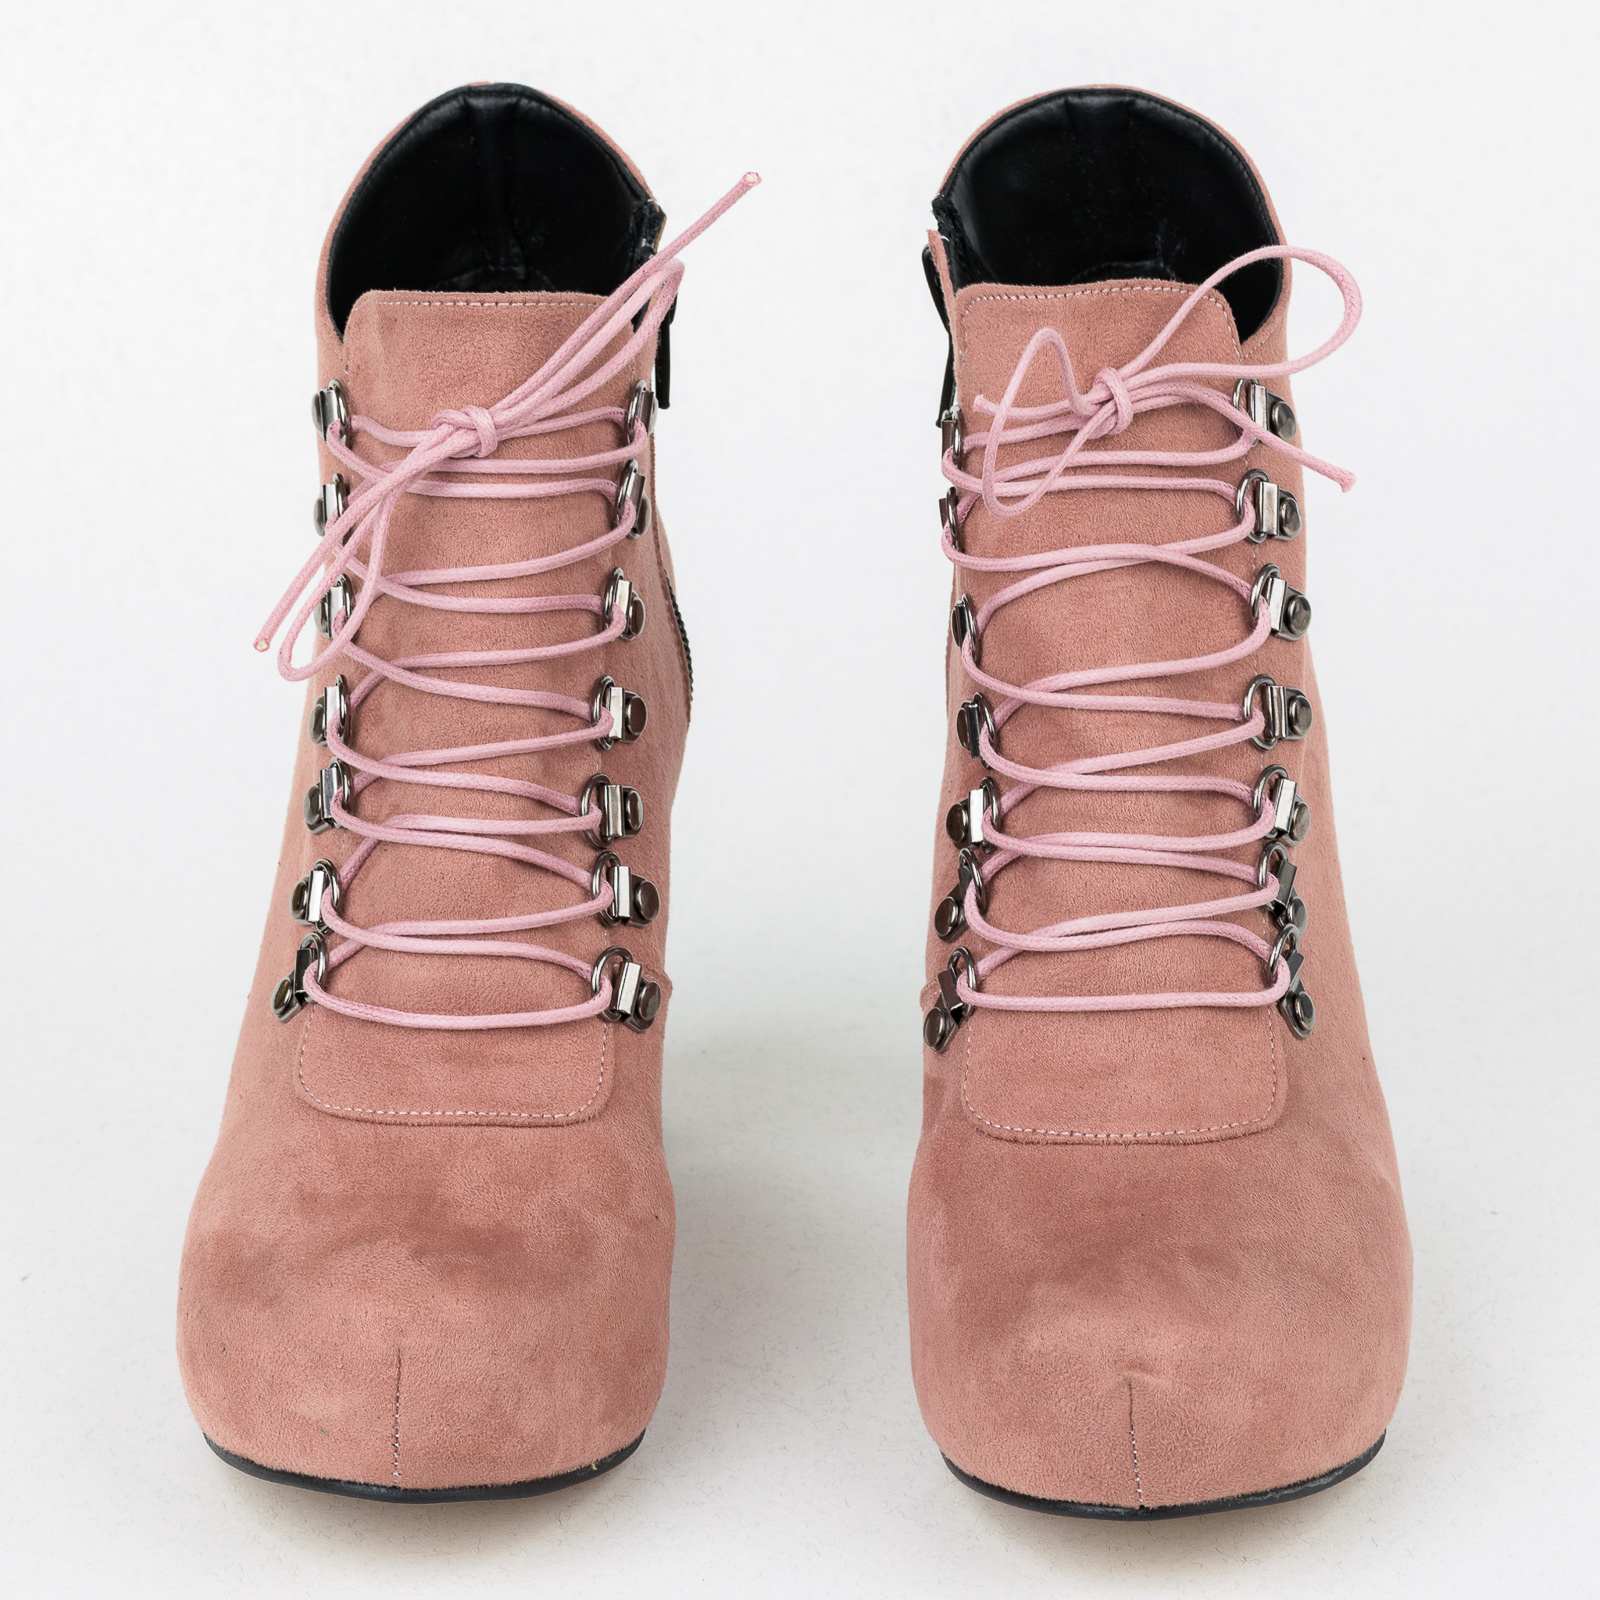 Women ankle boots B415 - ROSE